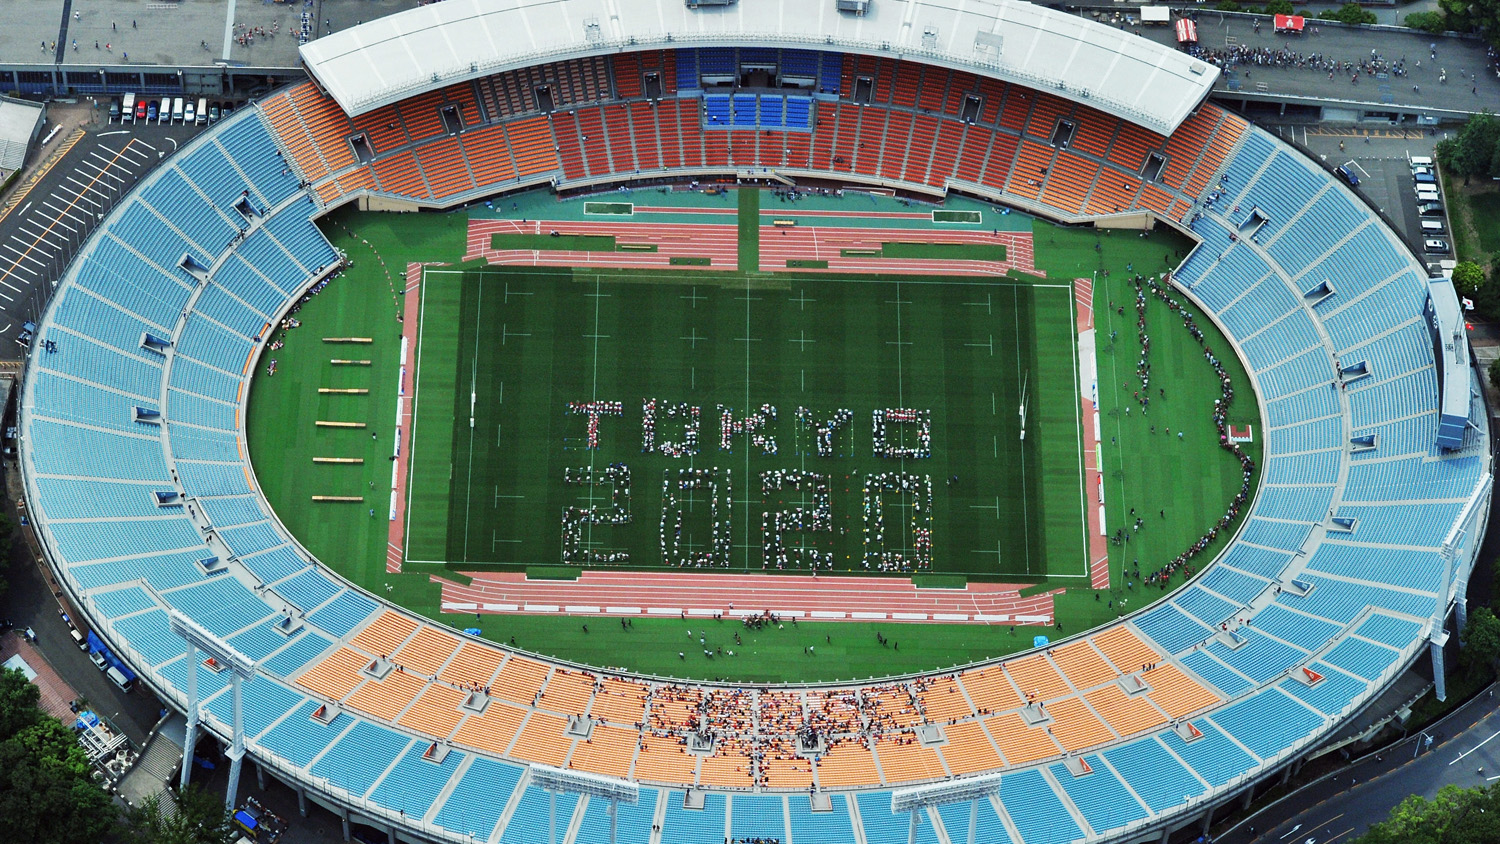 'Tokyo 2020' is formed by human letters prior to the Aisan Five Nations match between Japan and Hong Kong at the National Stadium in Tokyo on May 25, 2014.
